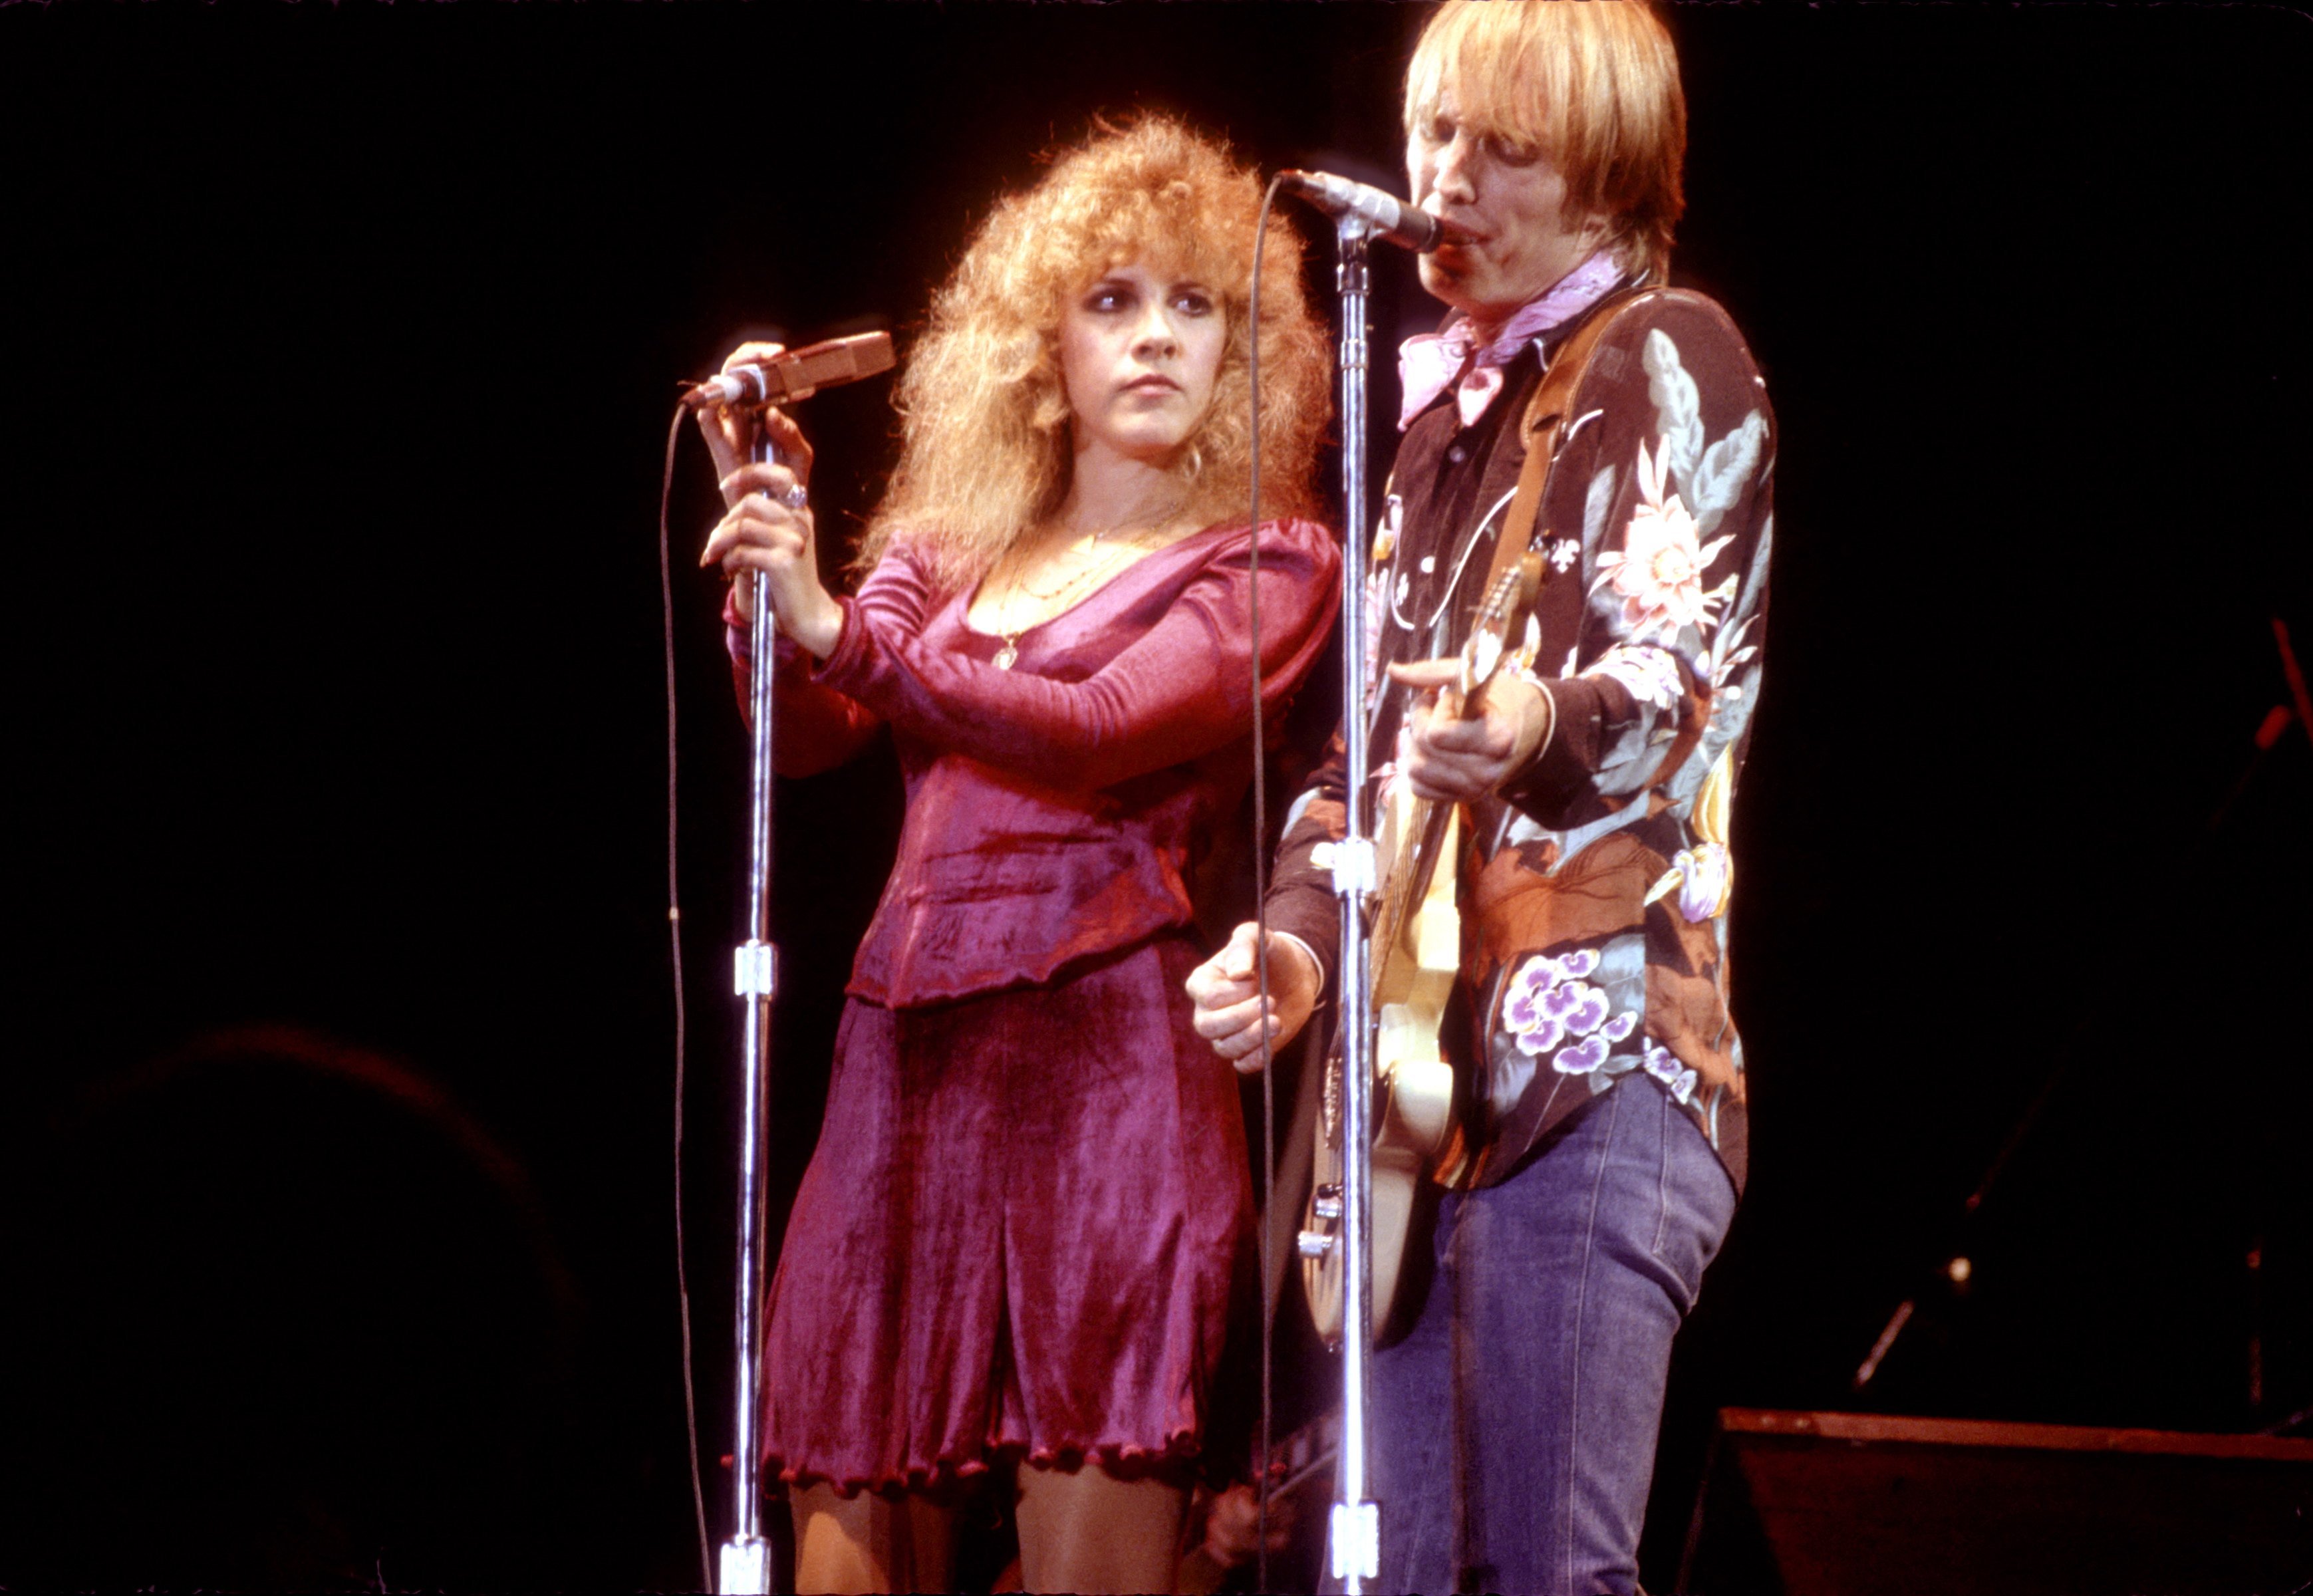 Stevie Nicks wears a purple outfit and Tom Petty wears a floral suit. They stand in front of microphones.